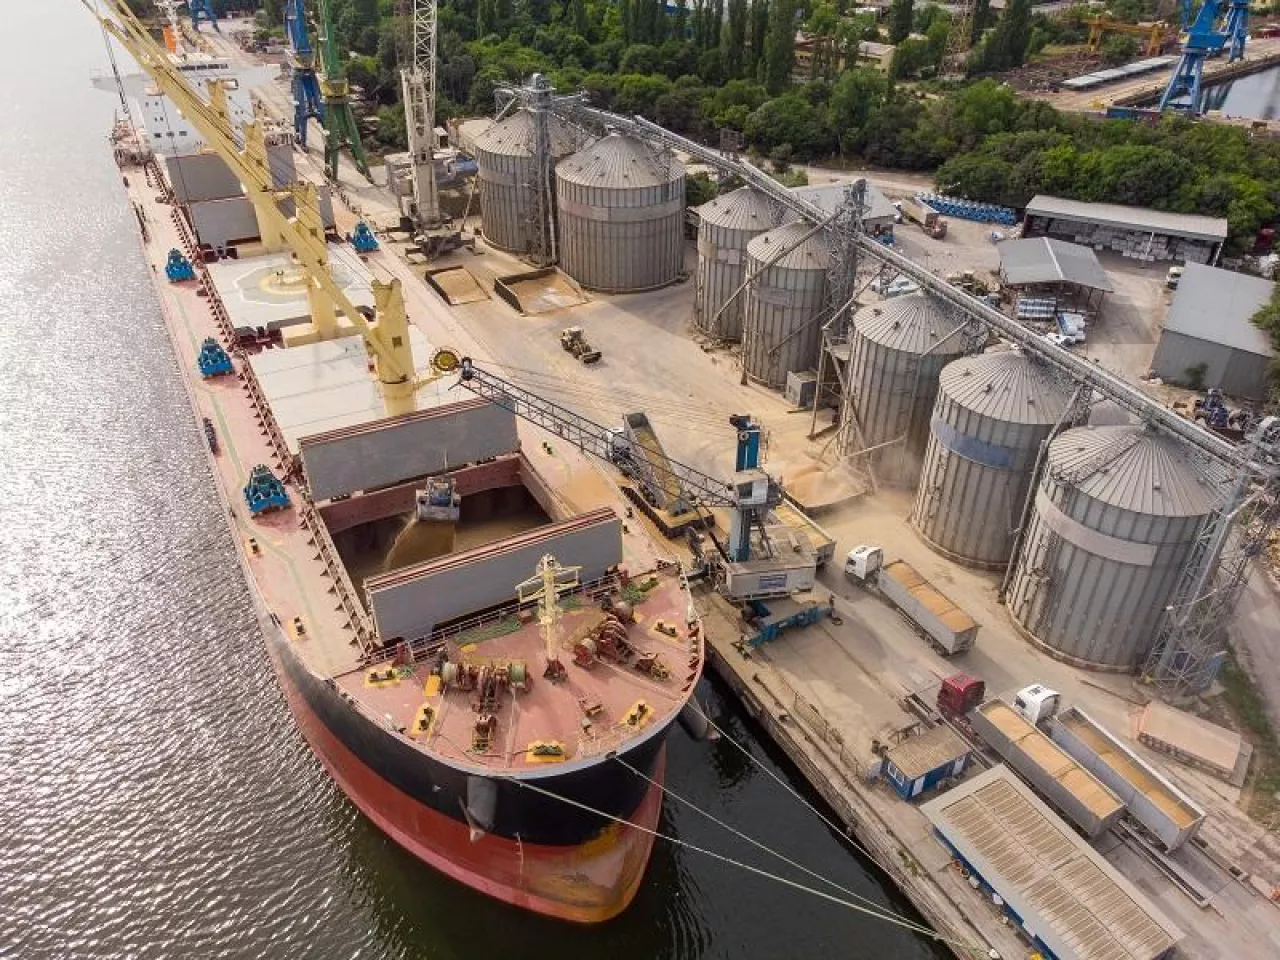 Loading grain into holds of sea cargo vessel in seaport from silos of grain storage. Bunkering of dry cargo ship with grain. Aerial top view